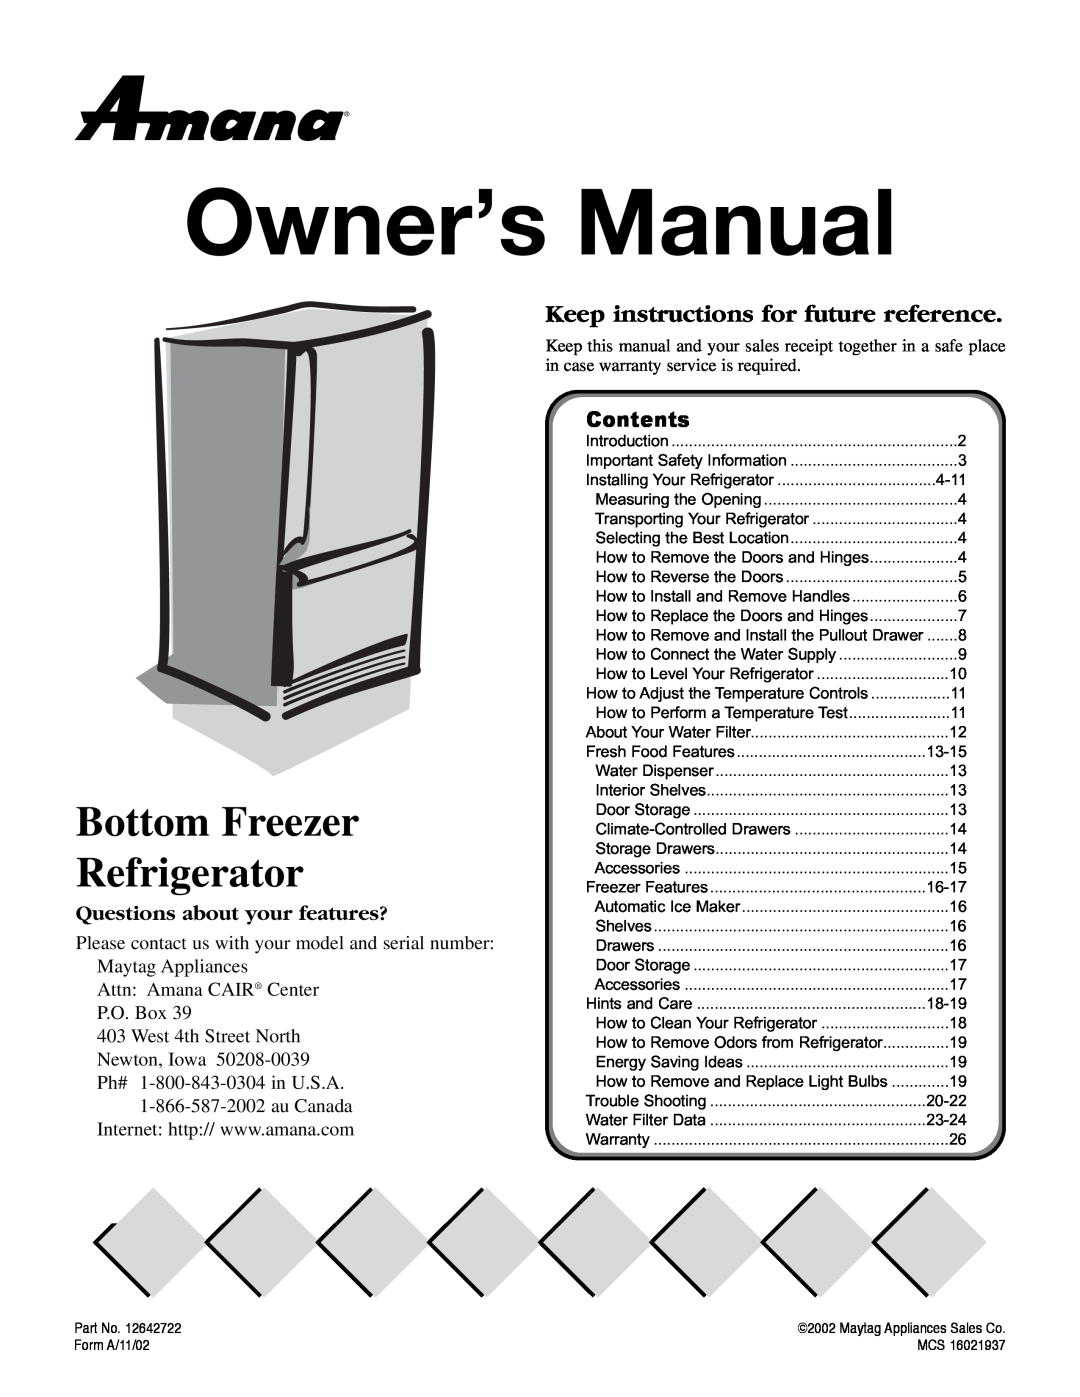 Maytag ARB2257CSR owner manual Bottom Freezer Refrigerator, Owner’s Manual, Keep instructions for future reference 